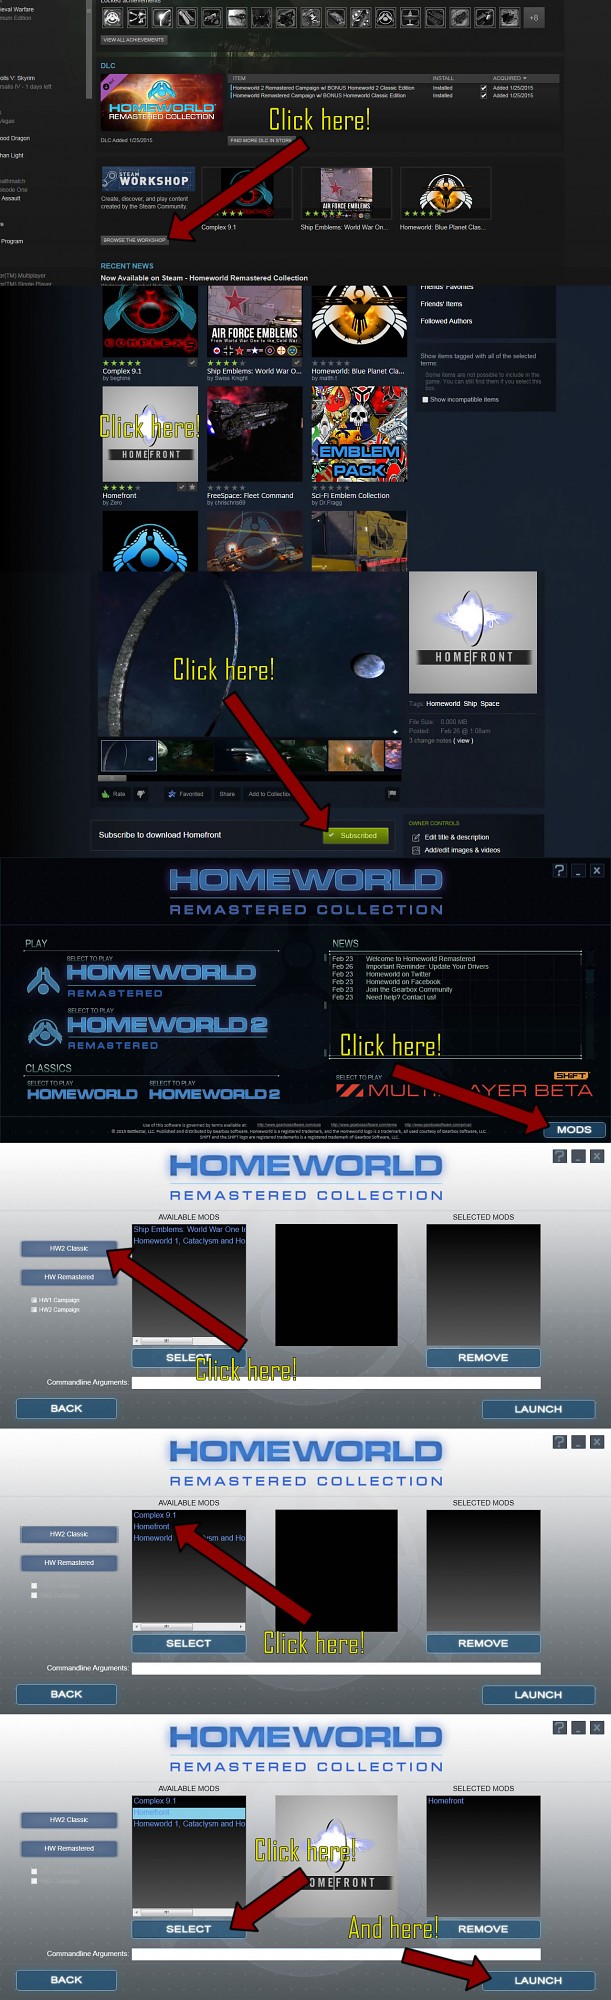 how to get download file from steam workshop